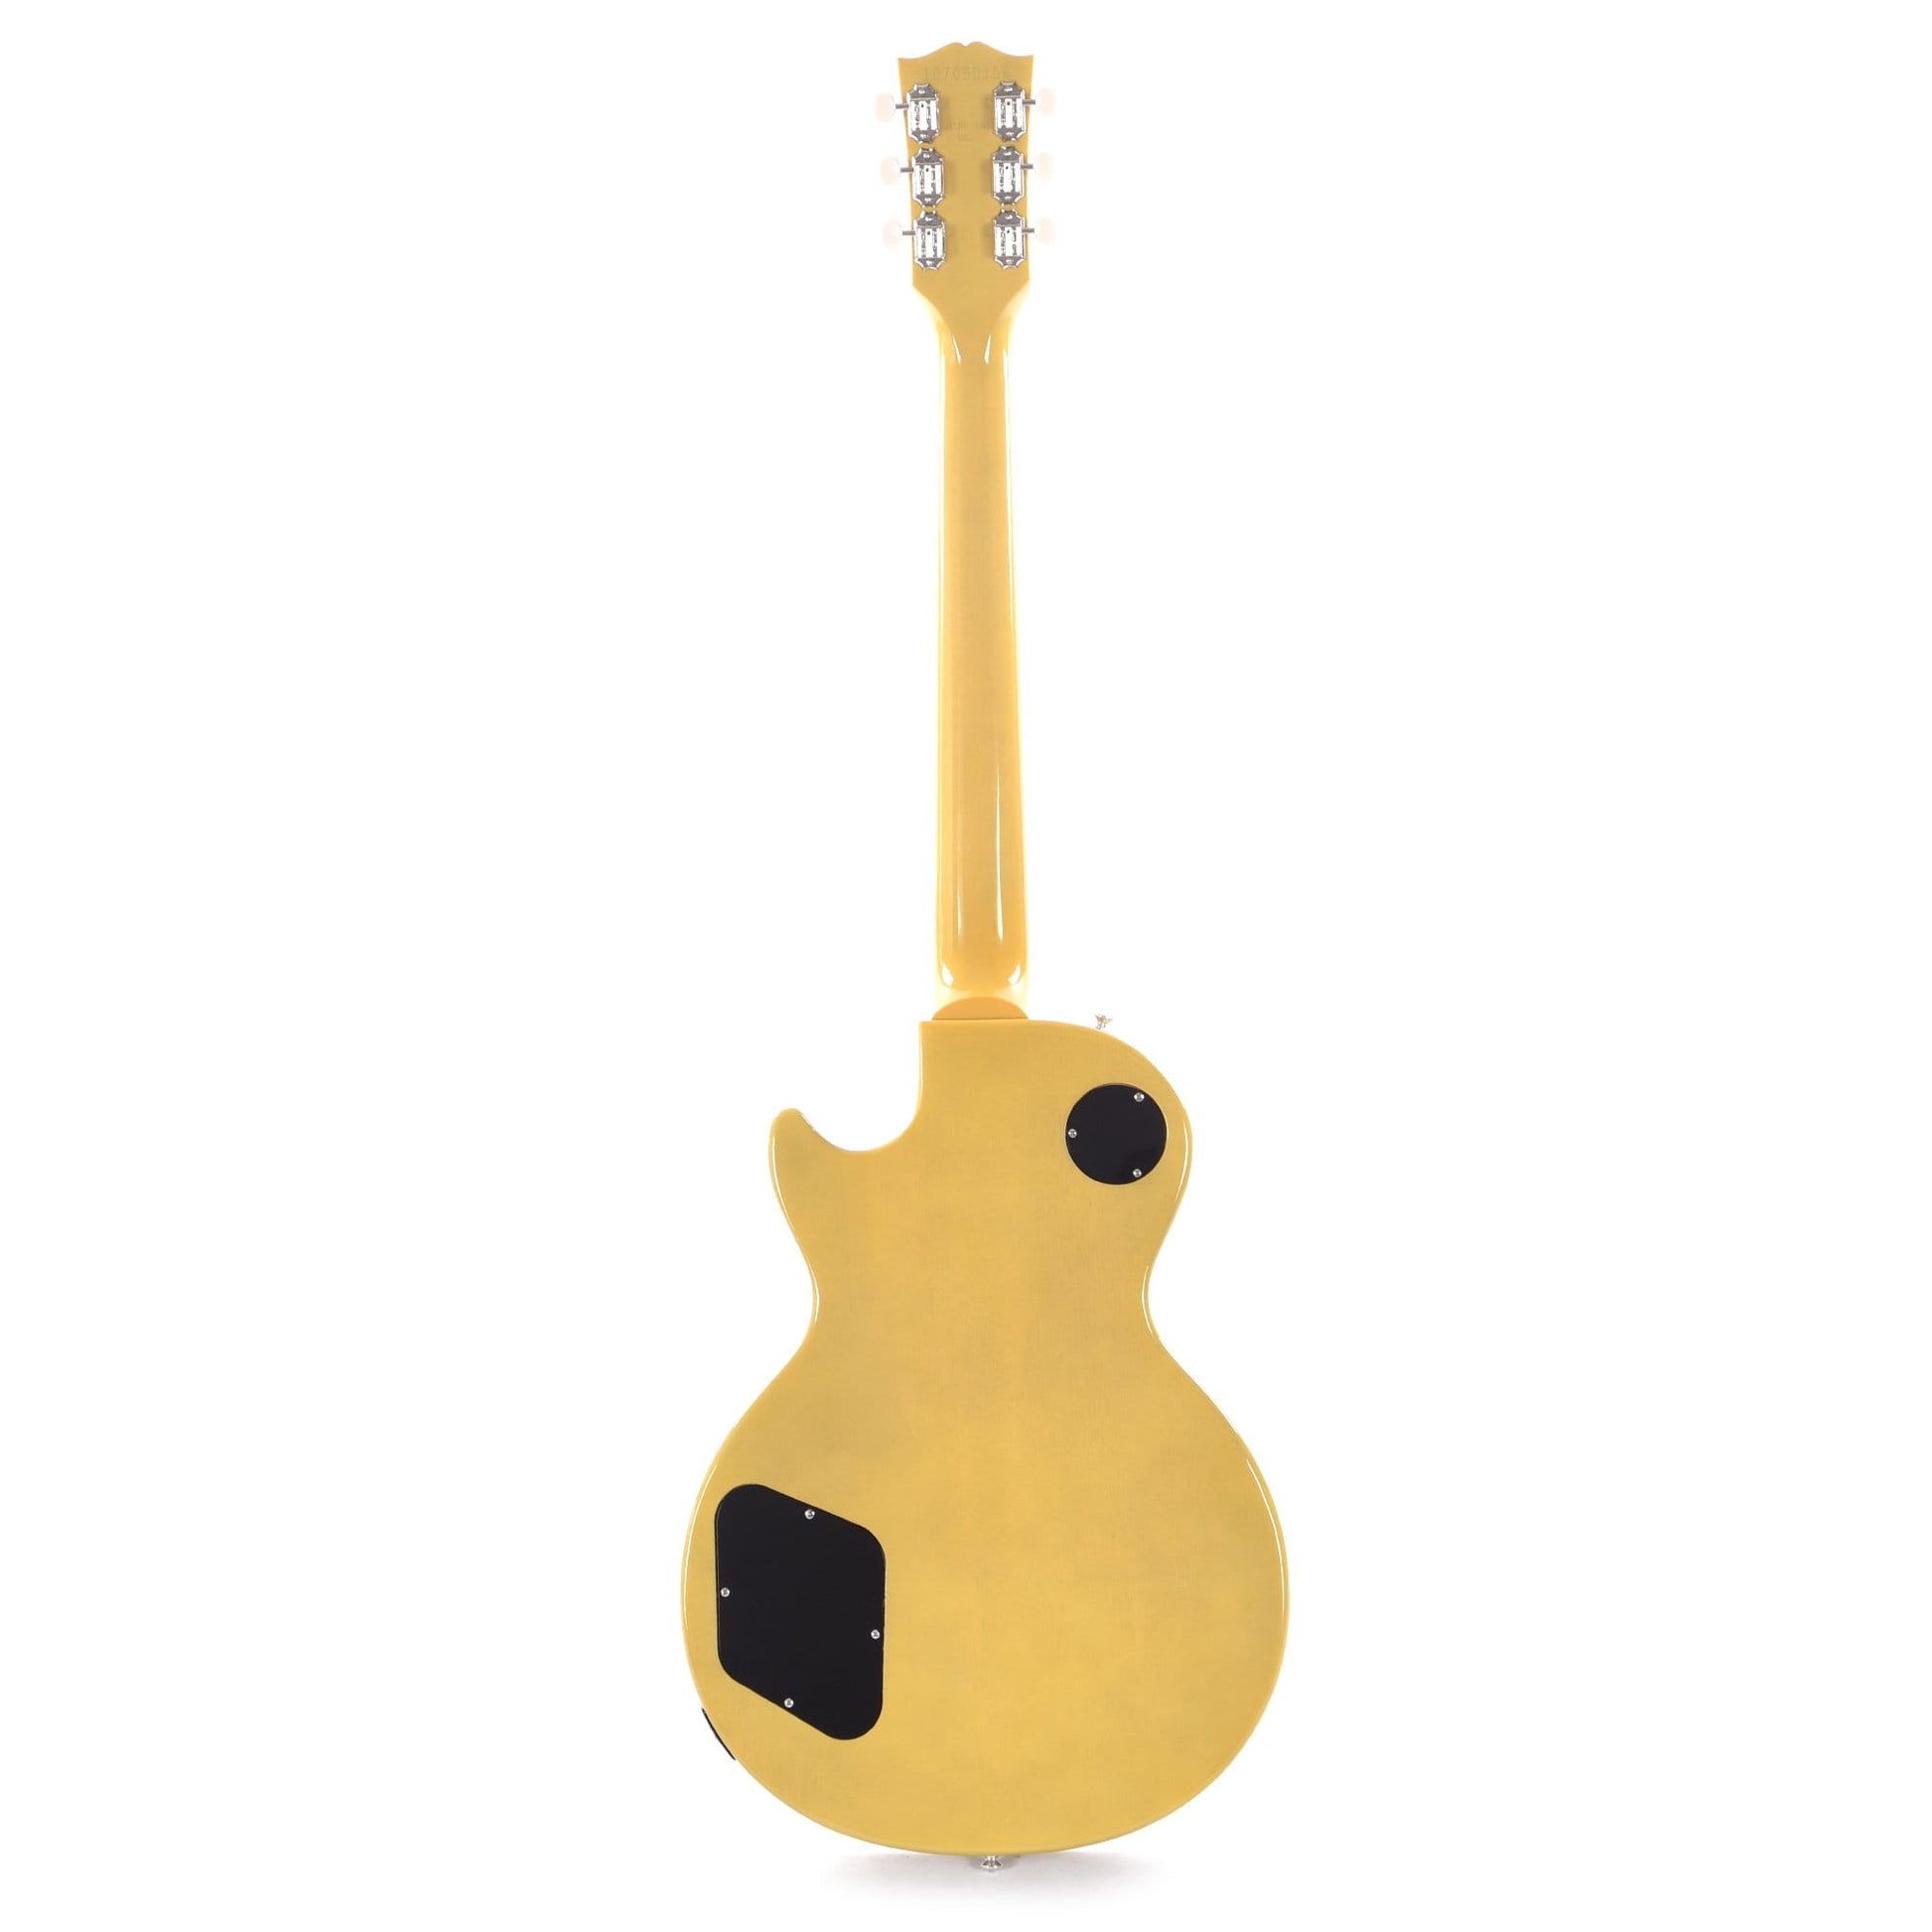 Gibson USA Les Paul Special TV Yellow Electric Guitars / Solid Body